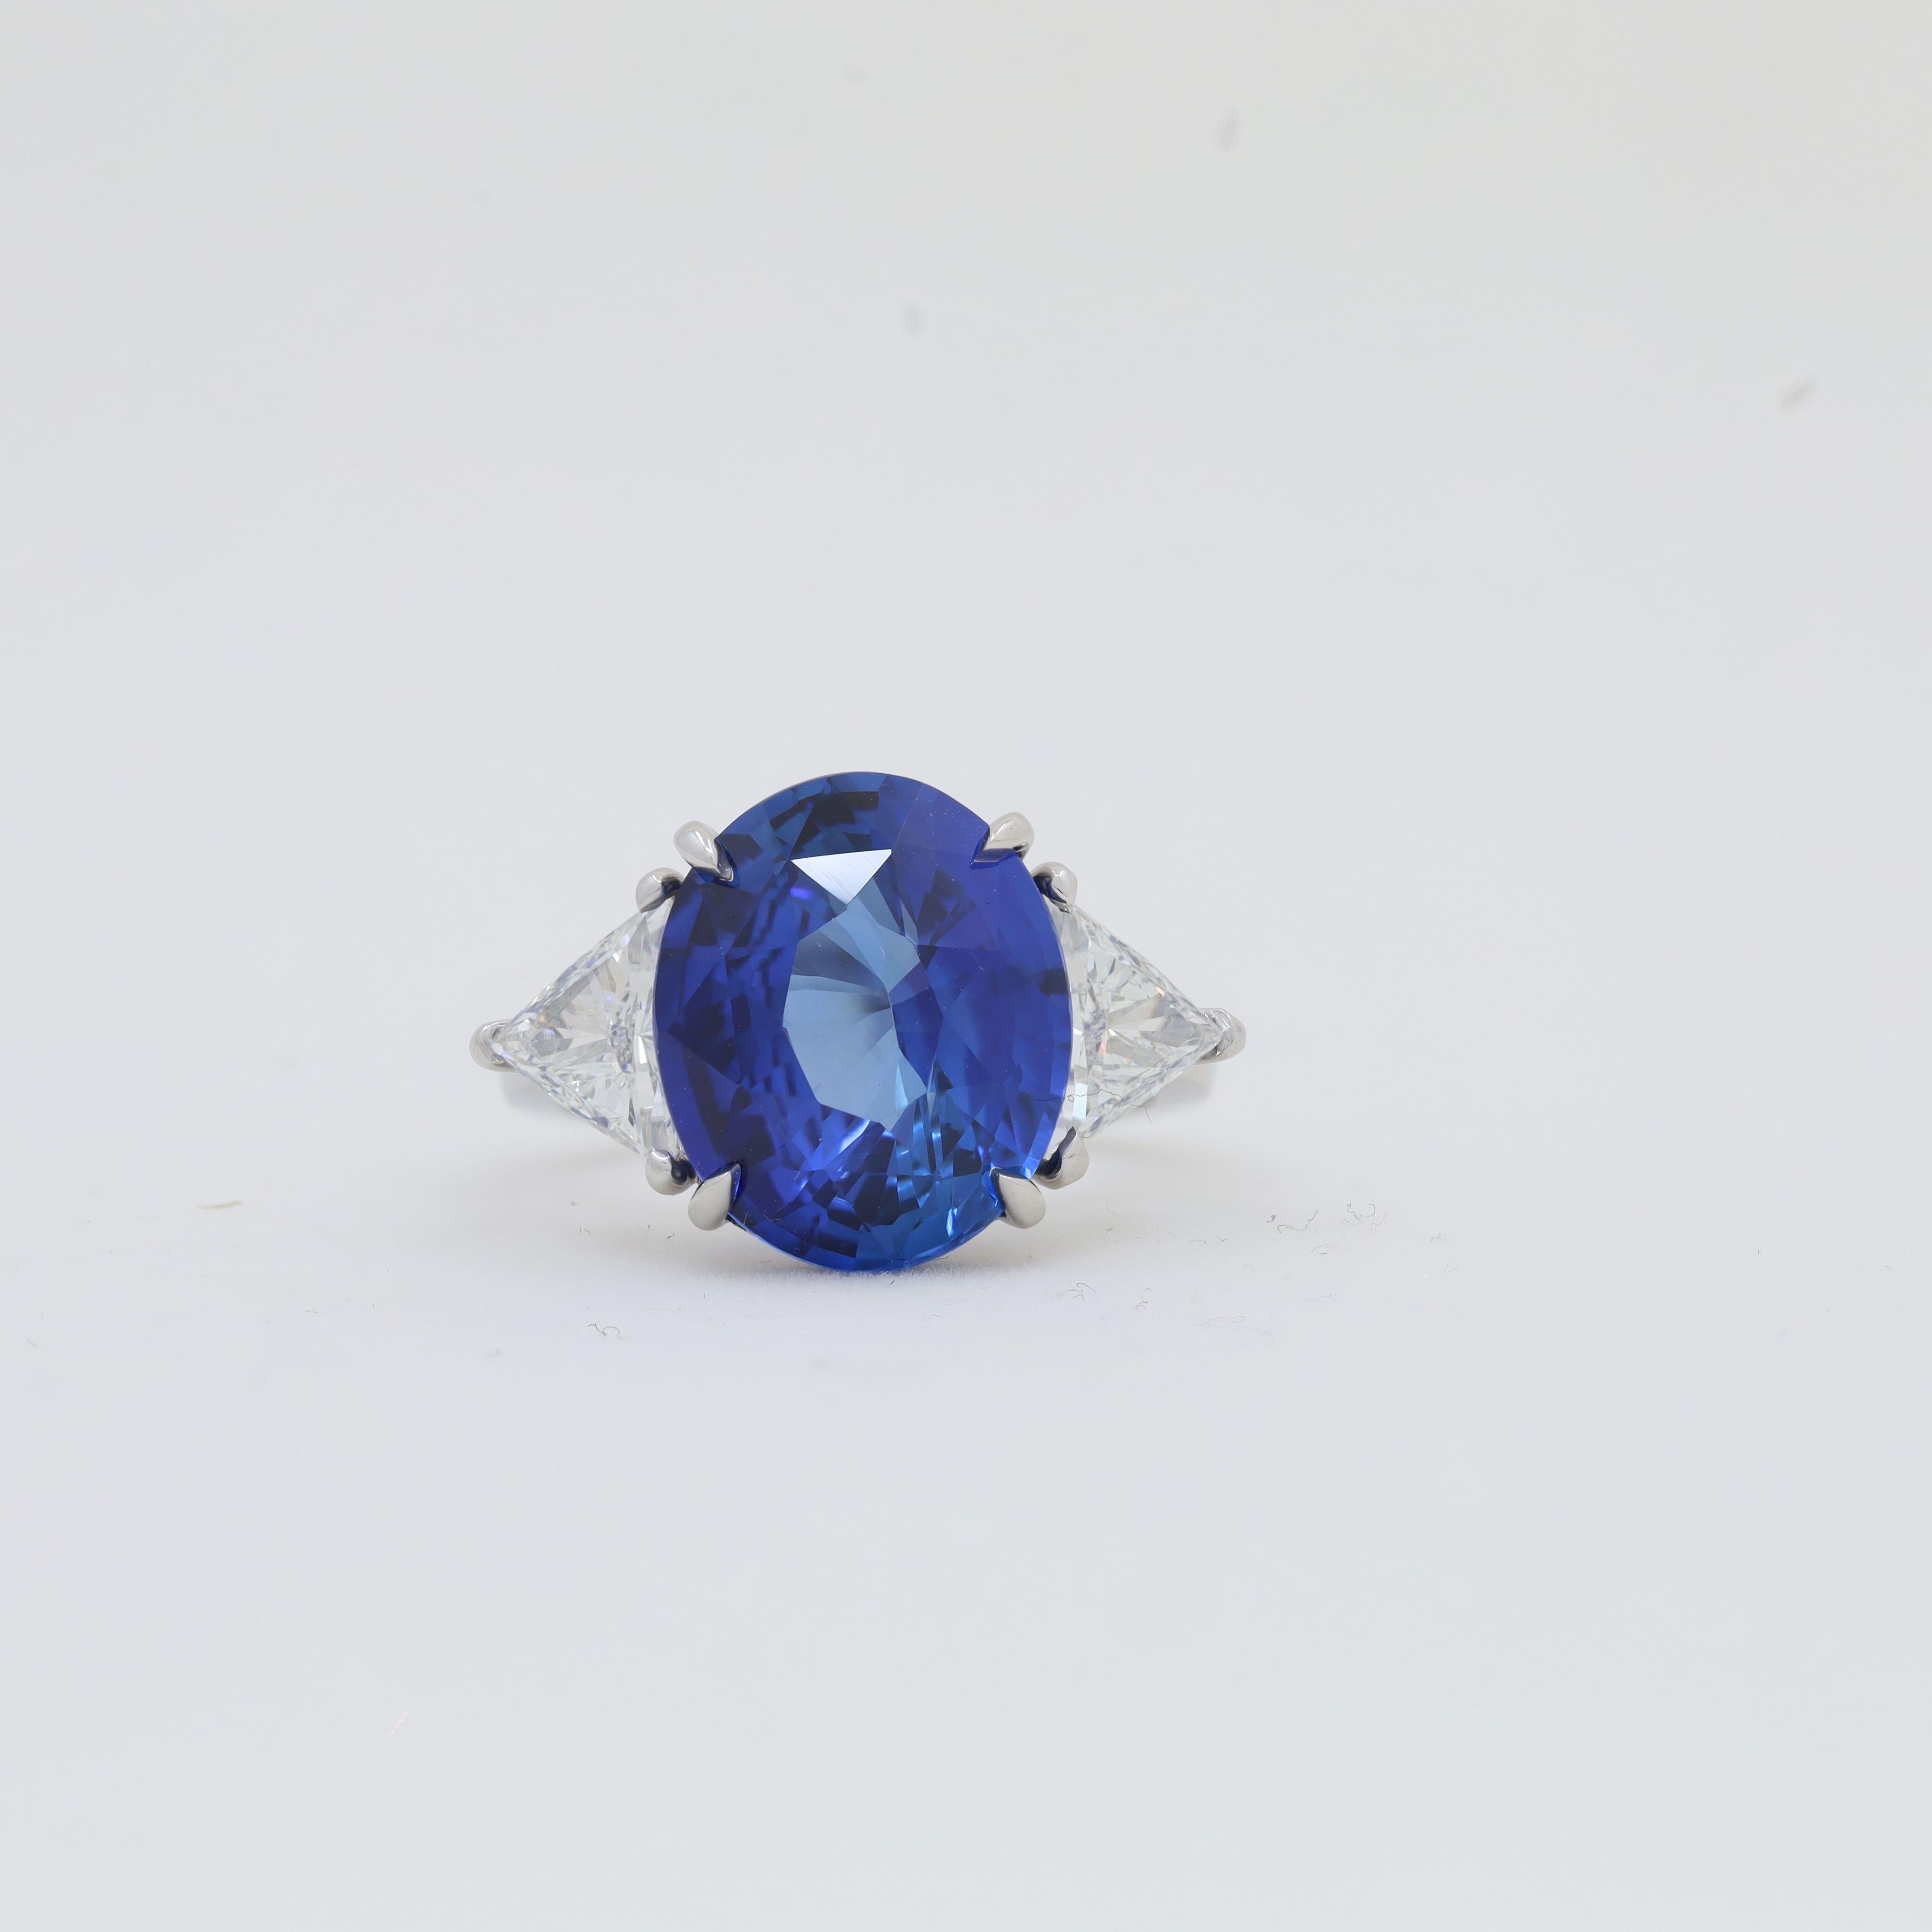 Modern Diana M. Platinum ring featuring an 8.51 ct Ceylon sapphire with 2 trillants   For Sale